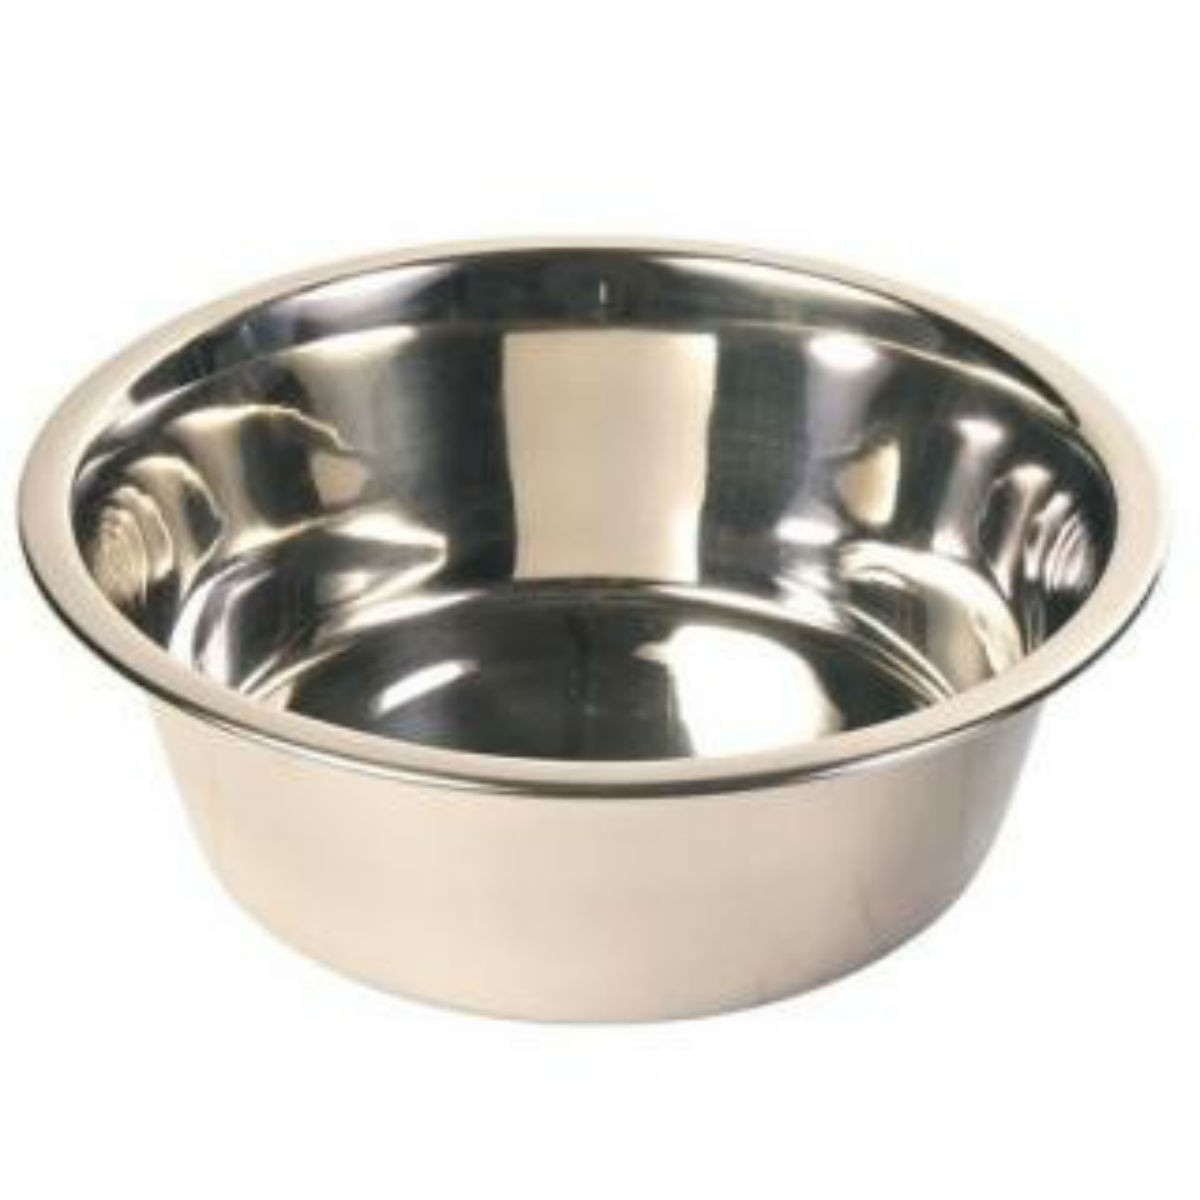 Stainless steel bowl 180ml